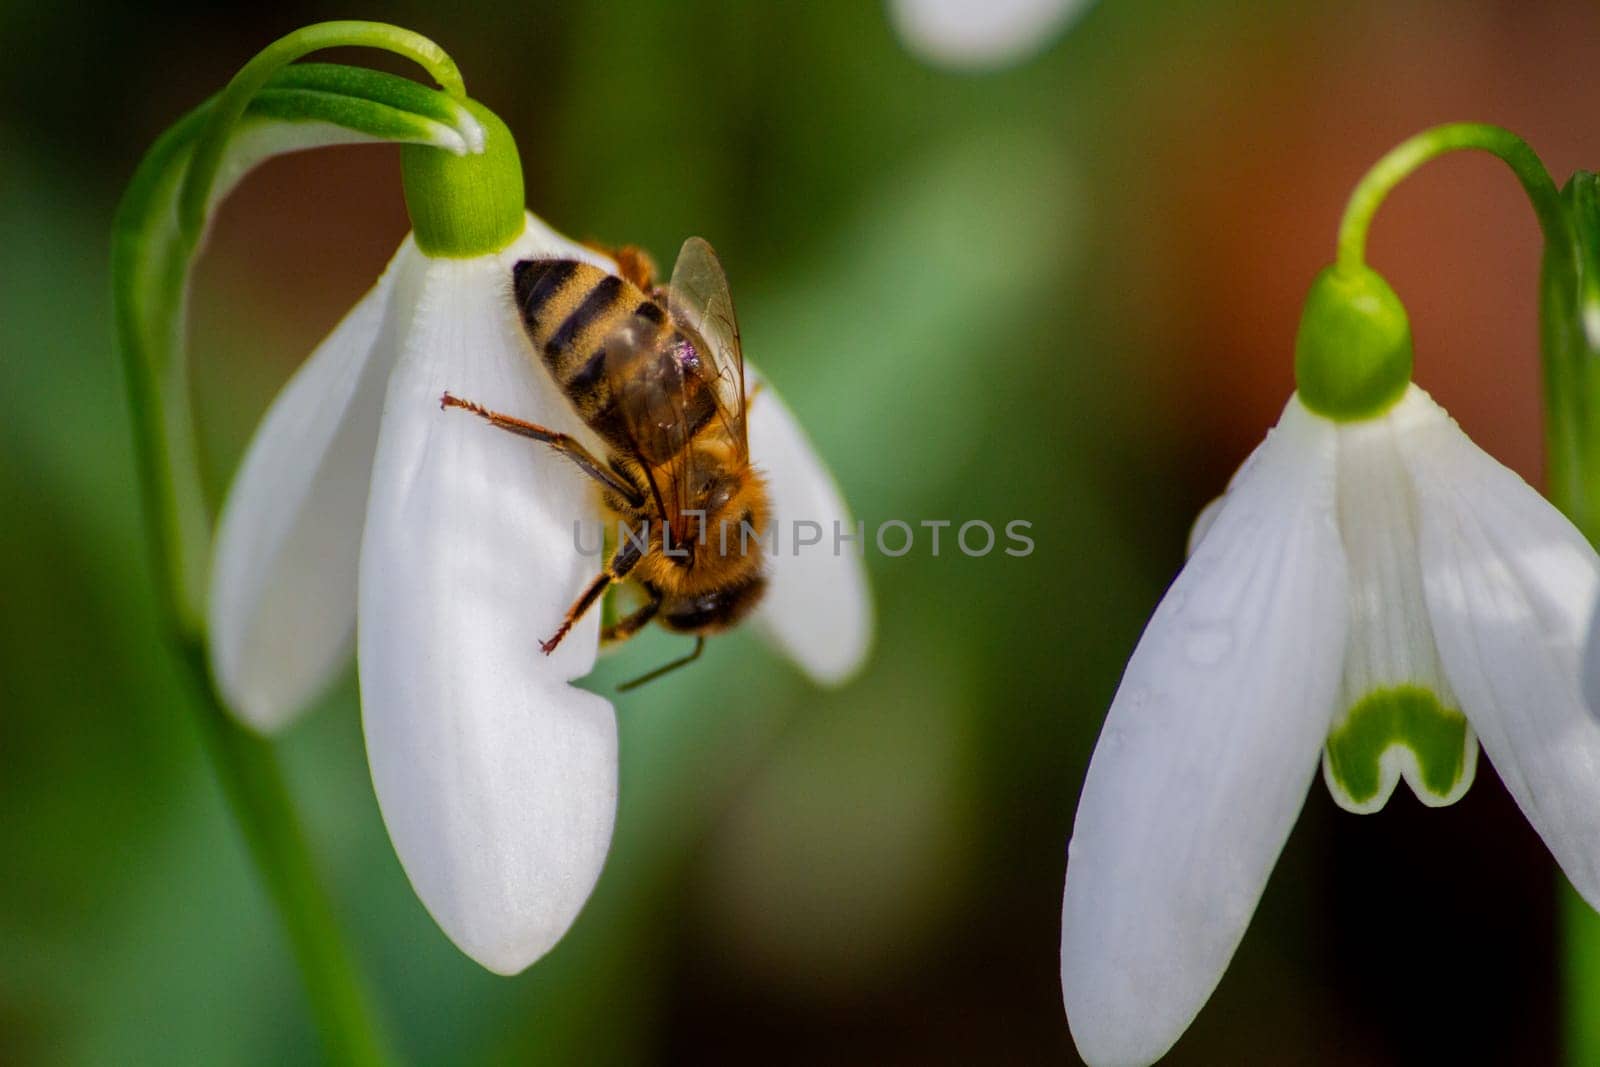 An arthropod pollinator, the bee, rests on a white flower in closeup view by Maksym